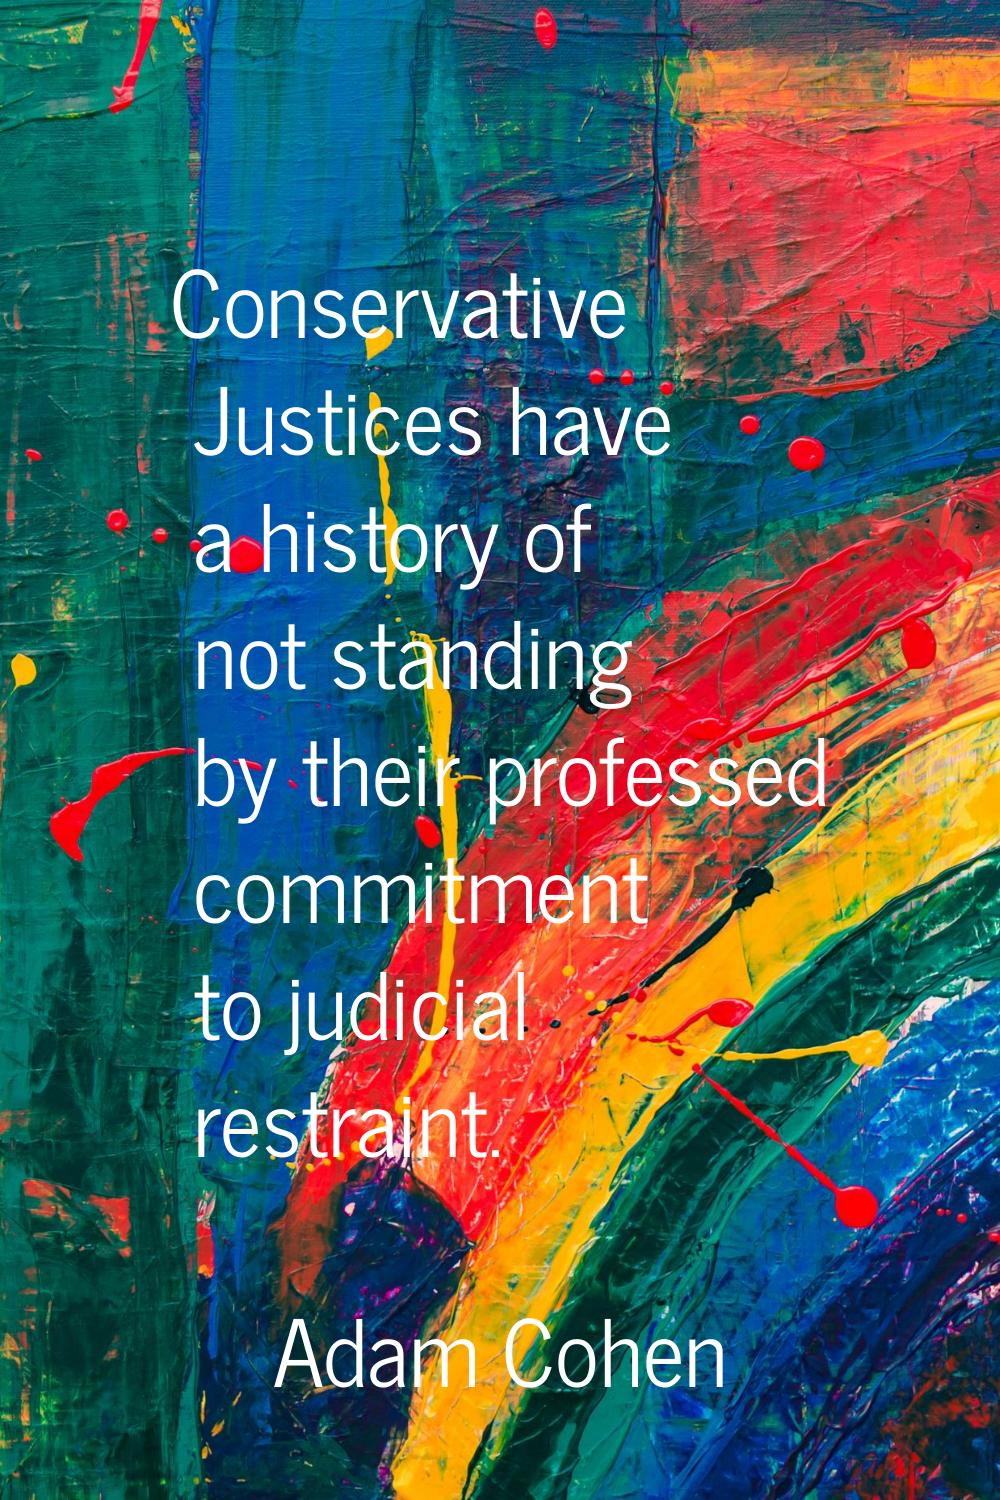 Conservative Justices have a history of not standing by their professed commitment to judicial rest